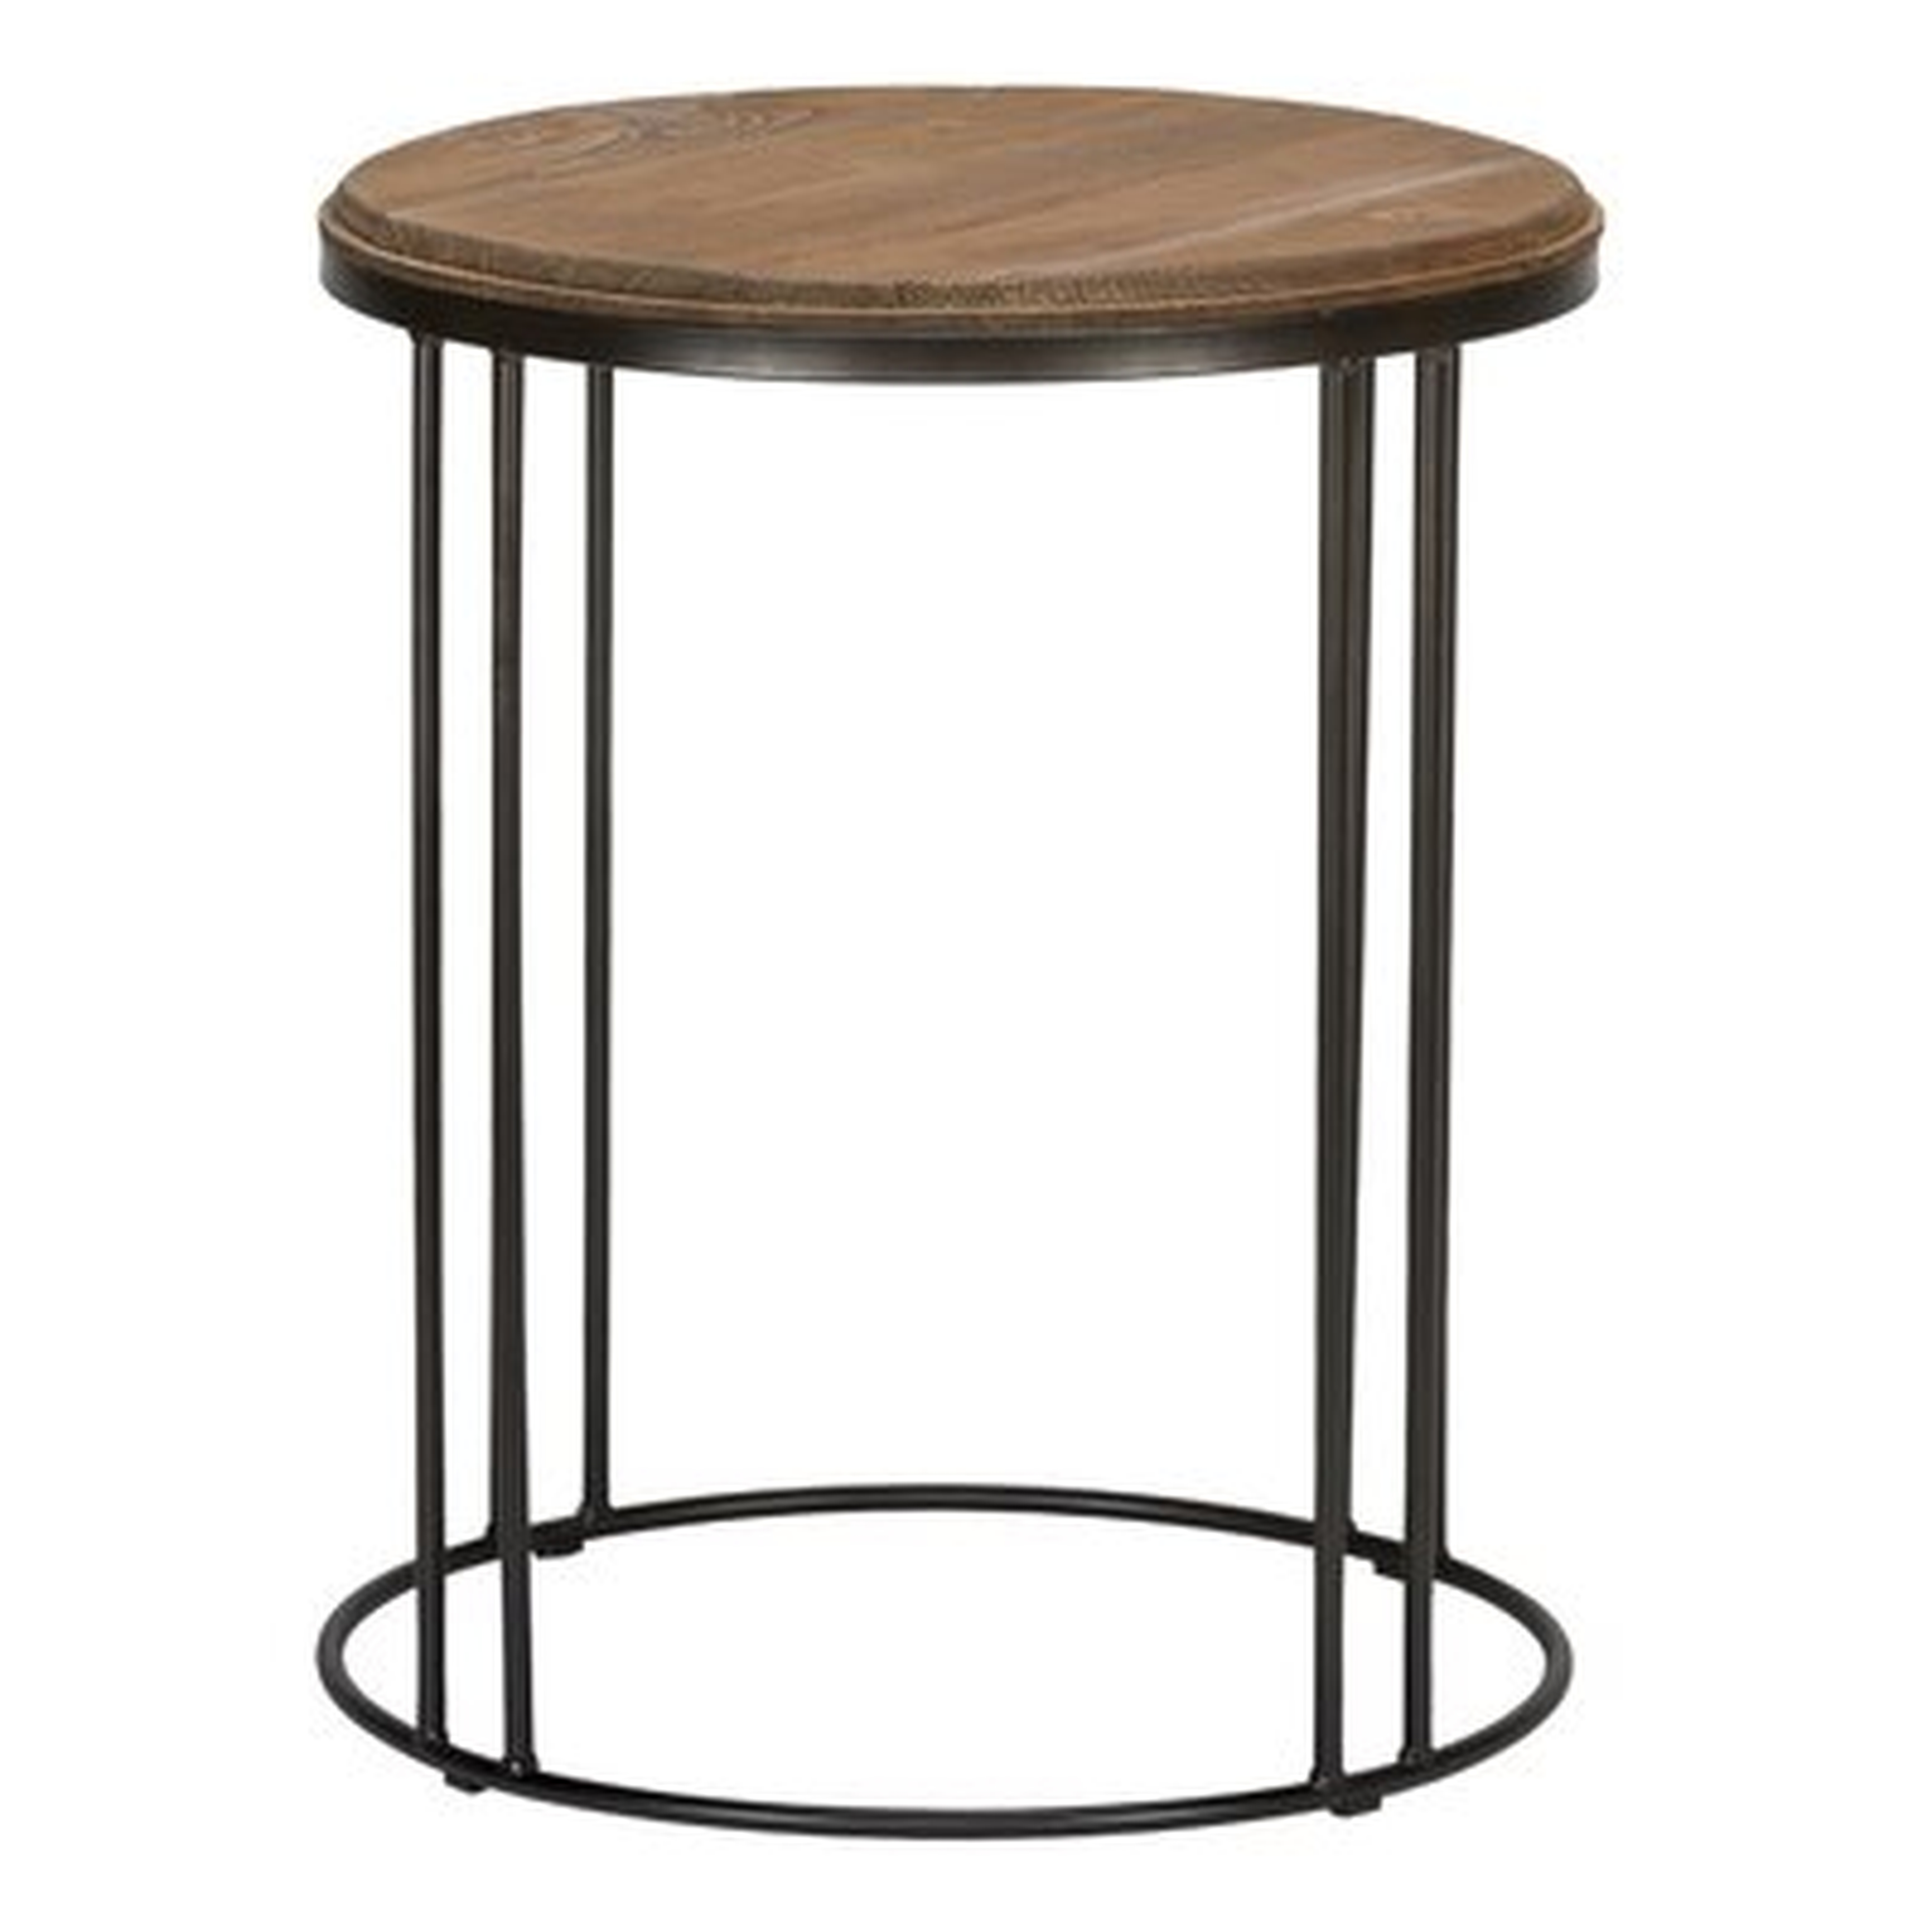 Winon Industrial Style Circular Wooden End Table with Iron Open Base, Brown and Black - Wayfair